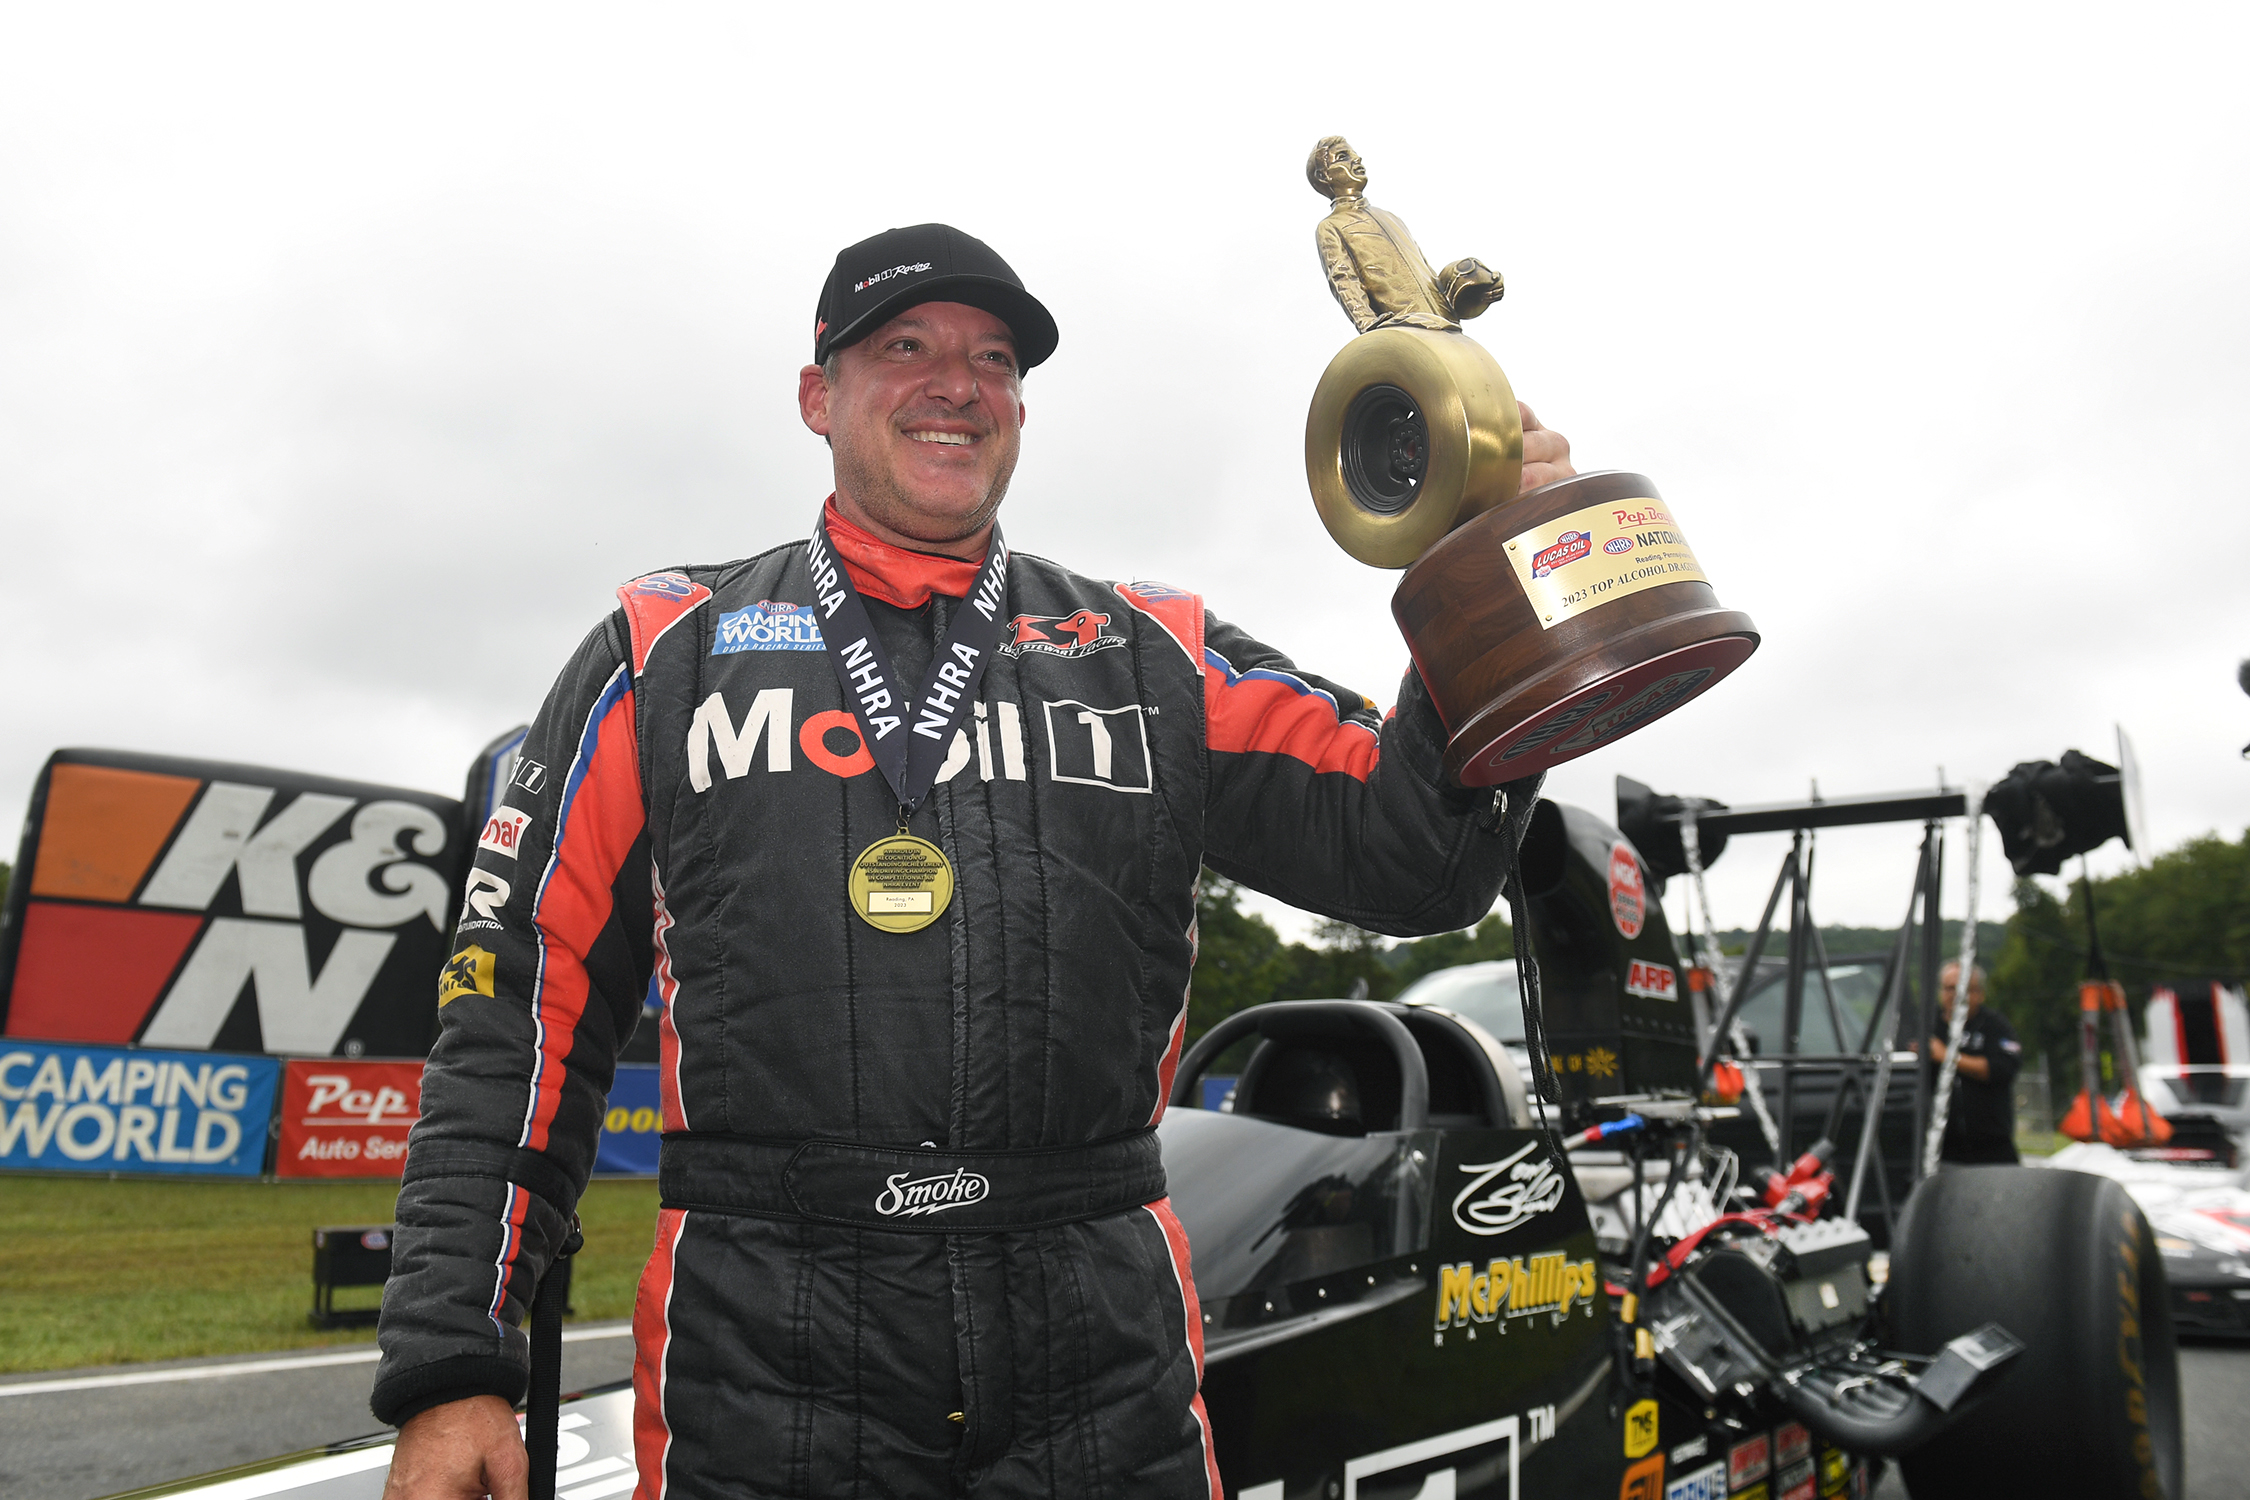 Tony Stewart finished runner-up in his rookie season in NHRA Drag Racing, competing in the Top Alcohol Dragster circuit. If he ever wins a NHRA championship, Stewart could become the first driver in history to win championships in NASCAR, IndyCar and NHRA. Photo courtesy NHRA.